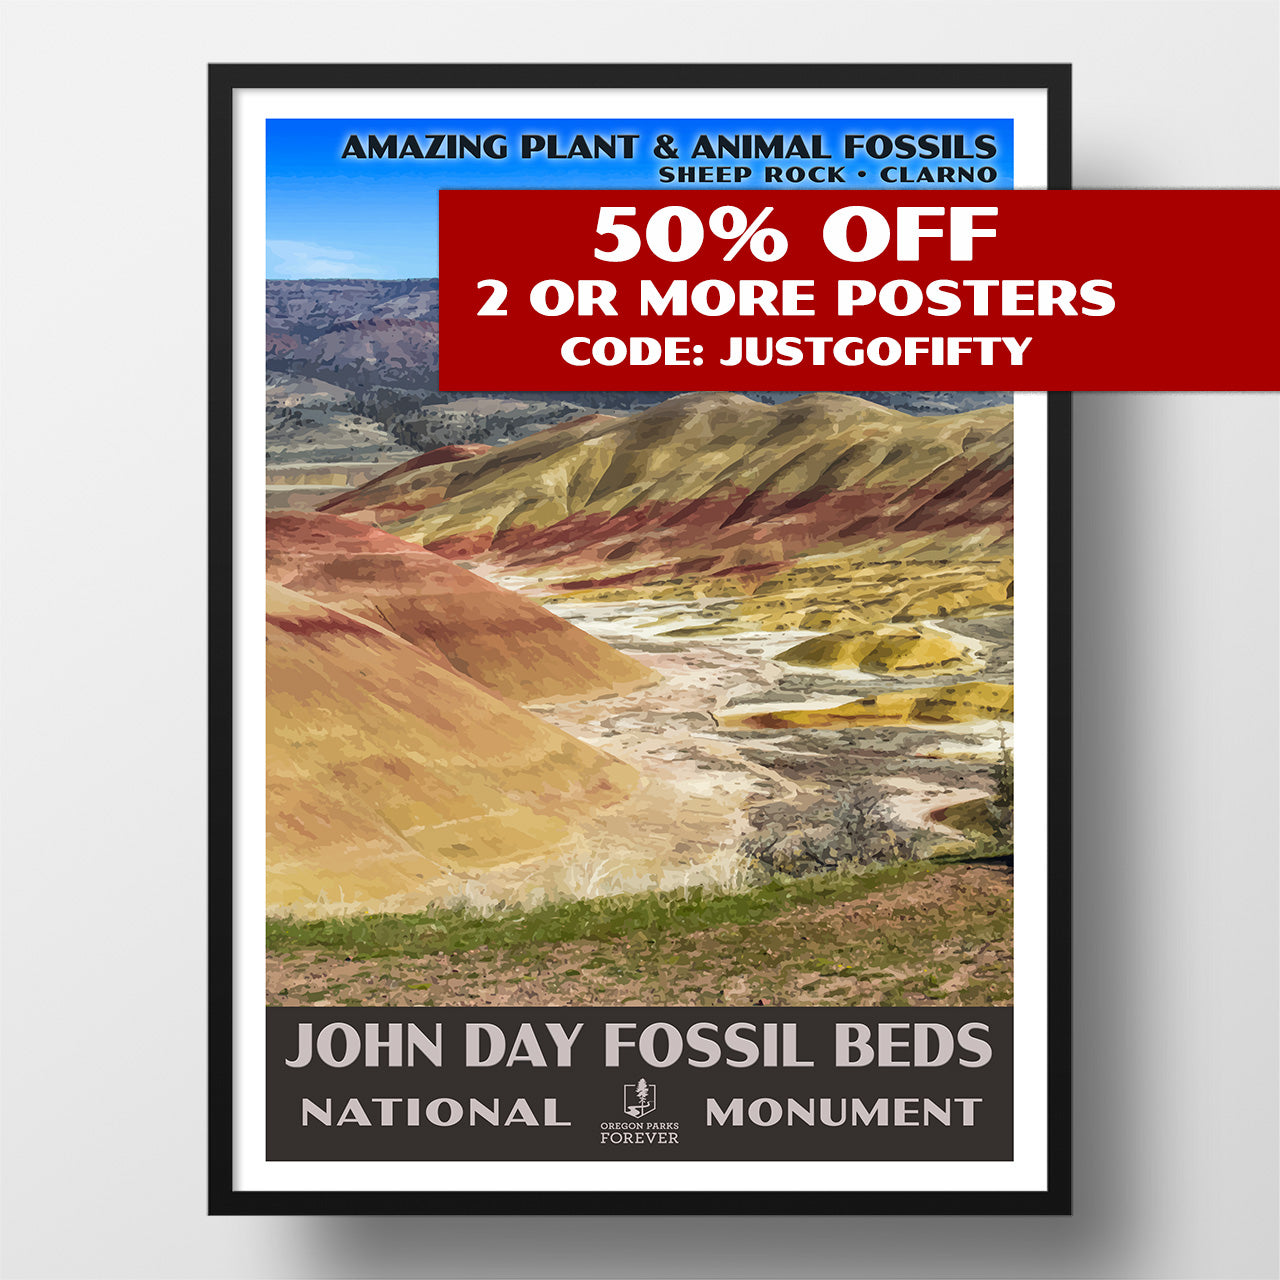 John Day Fossil Beds National Monument Poster - WPA (Painted Hills Unit) - OPF